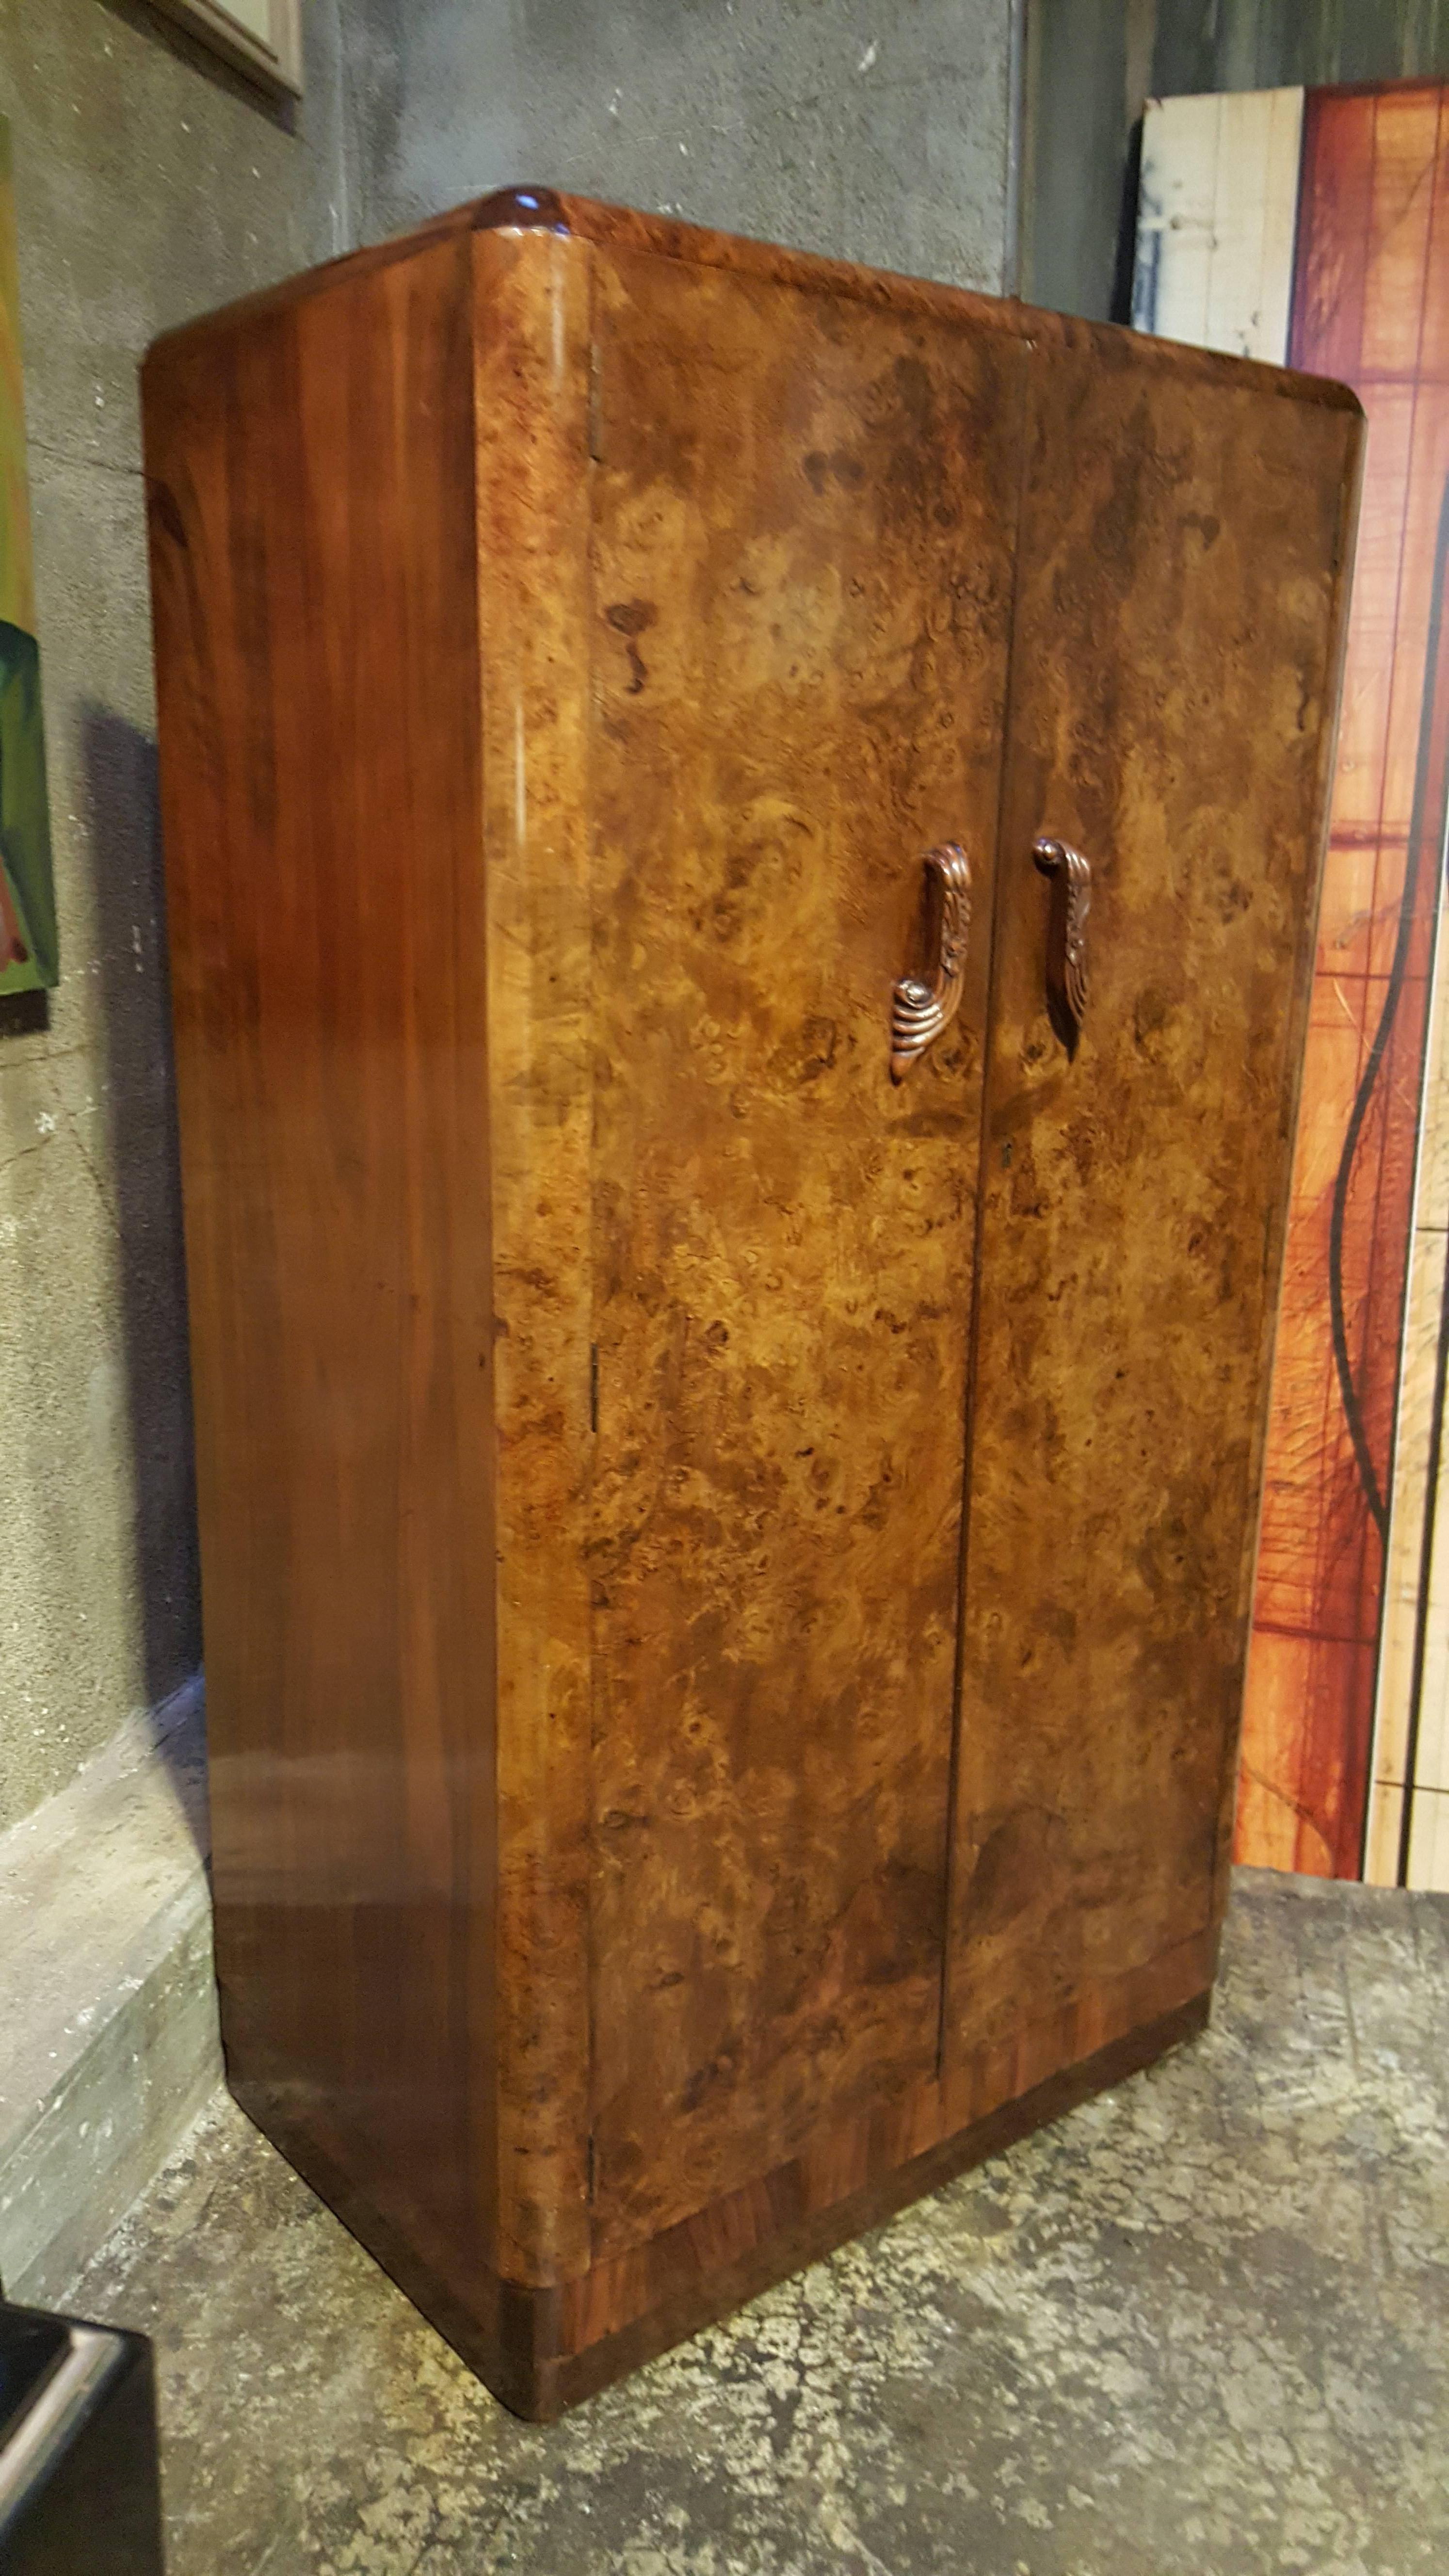 A compact size, fully fitted butlers / wardrobe cabinet in burl-walnut with Art Deco pulls. Interior features a shoe rack, clothes hanger, glass cabinets and shelving. The diminutive size will fit nicely where extra storage is needed. Perfect for a